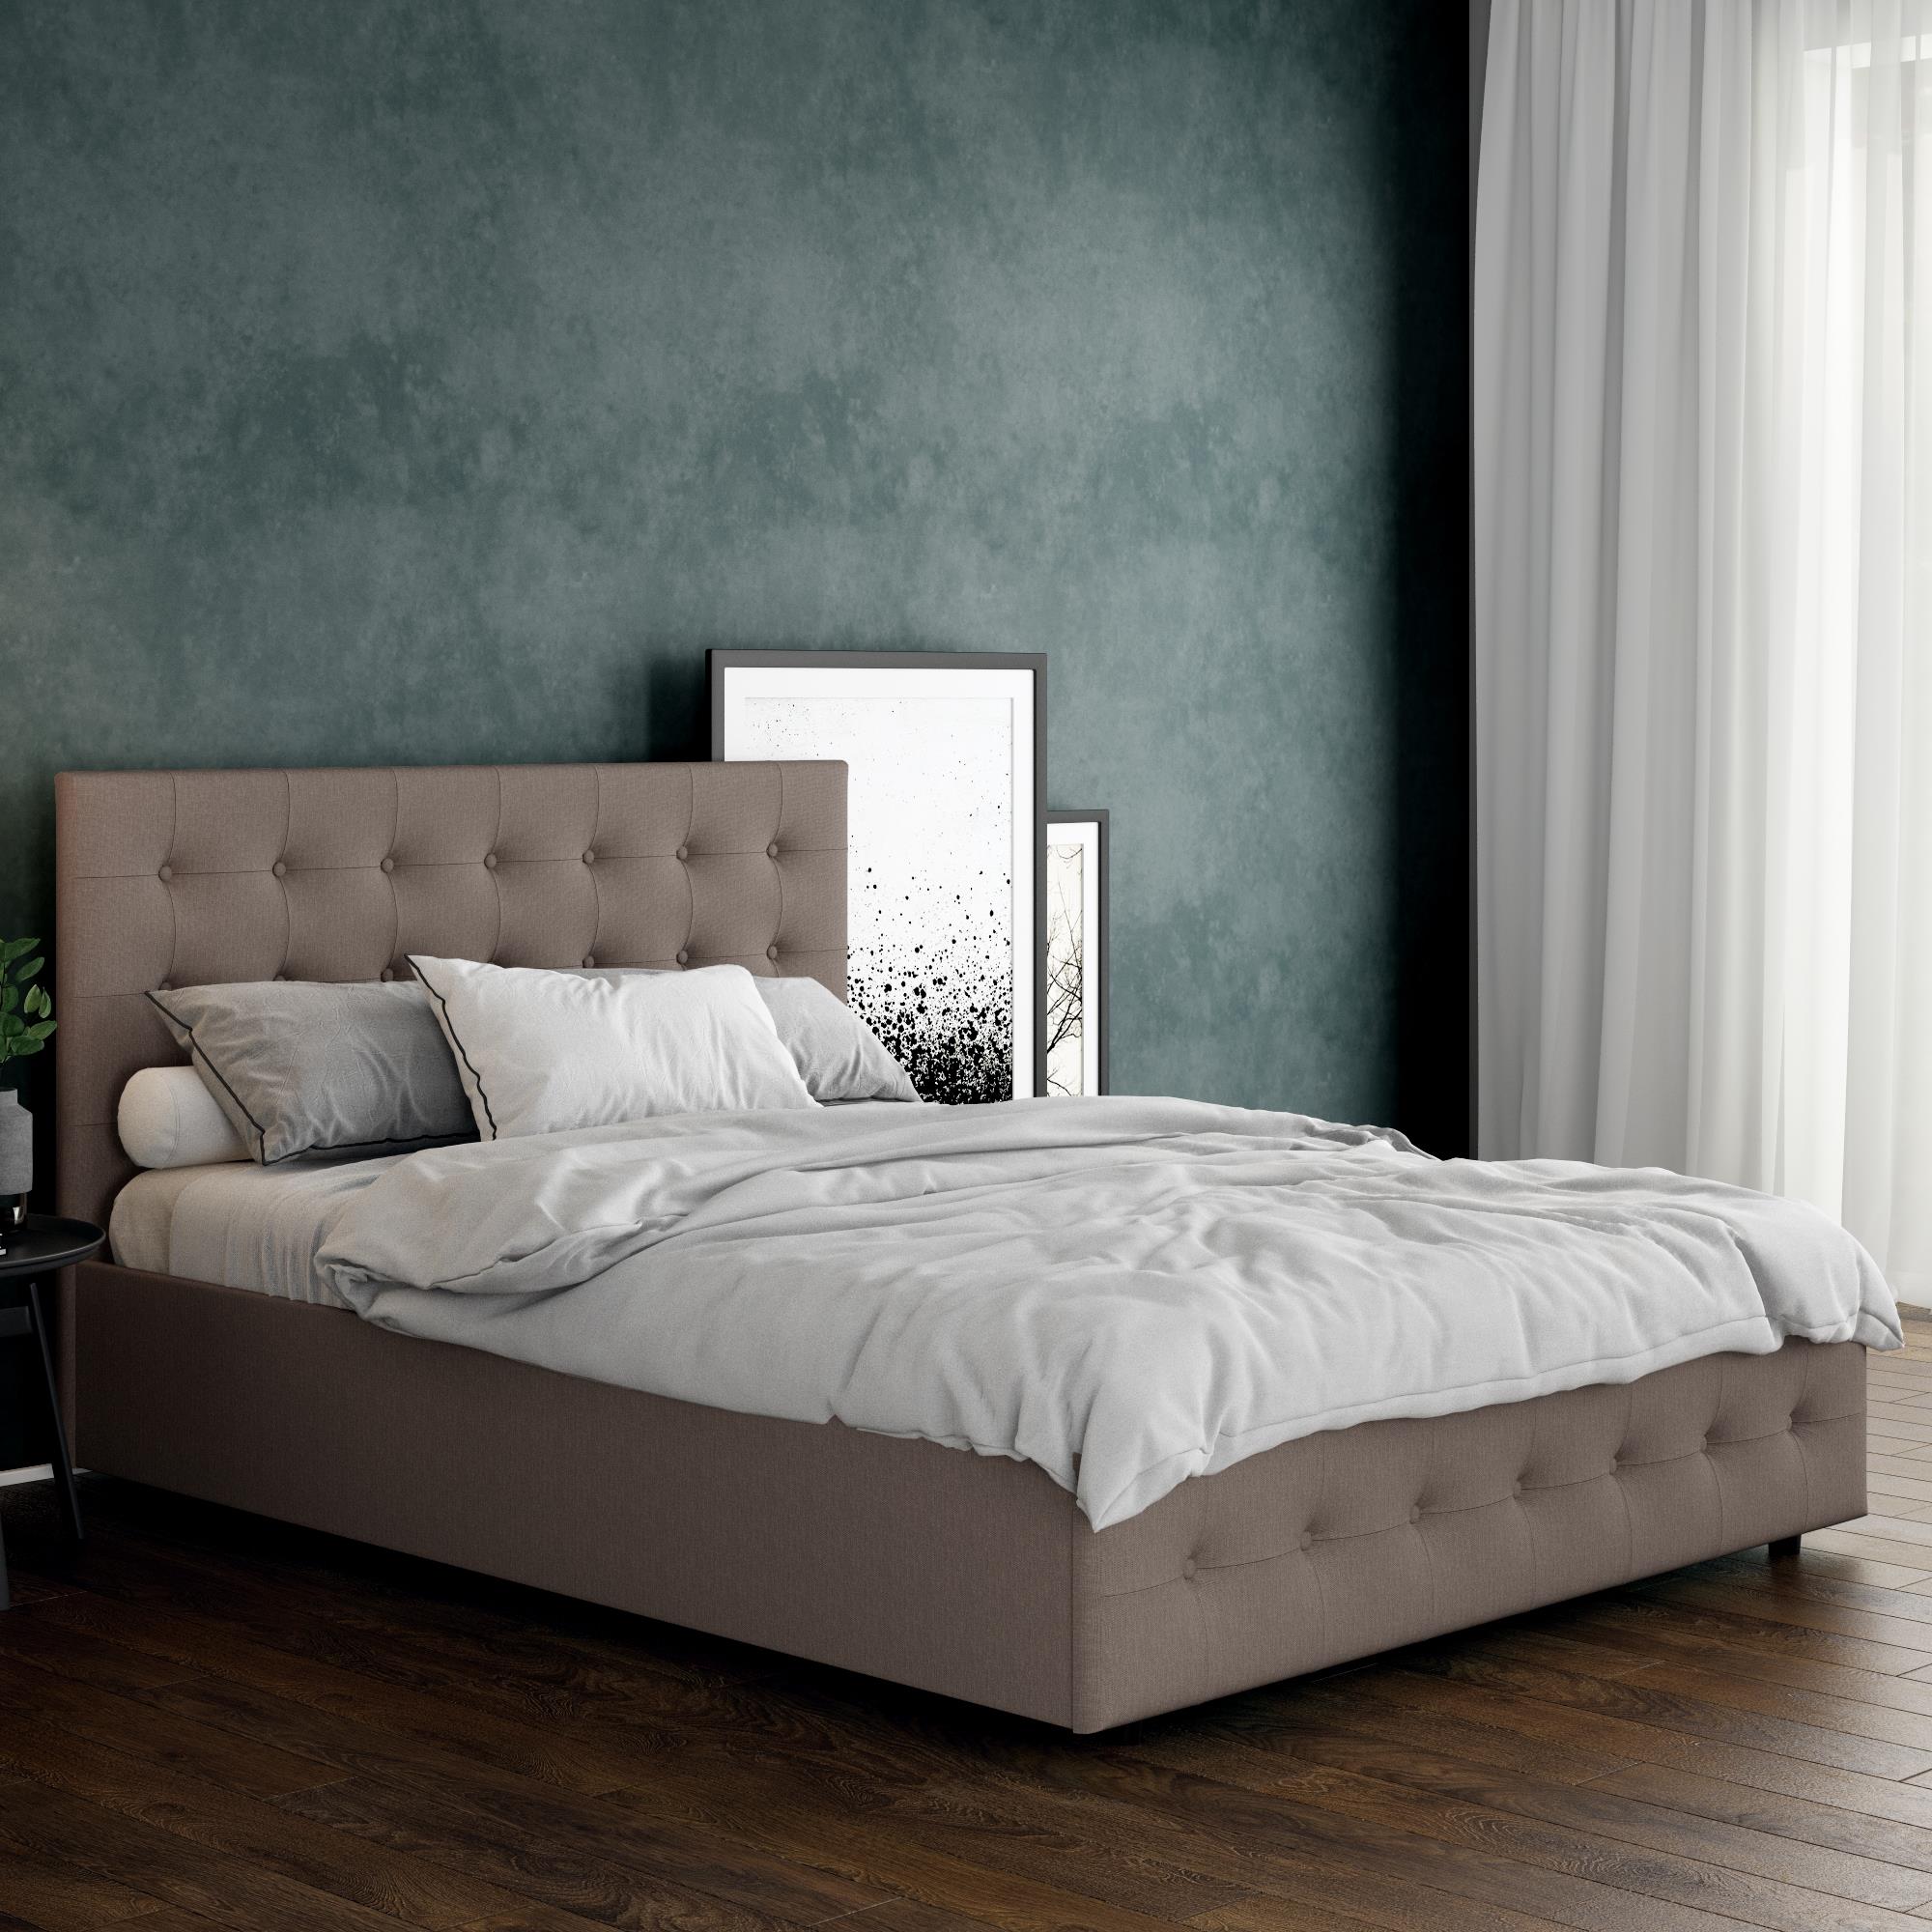 best of With Black storage bed tufted